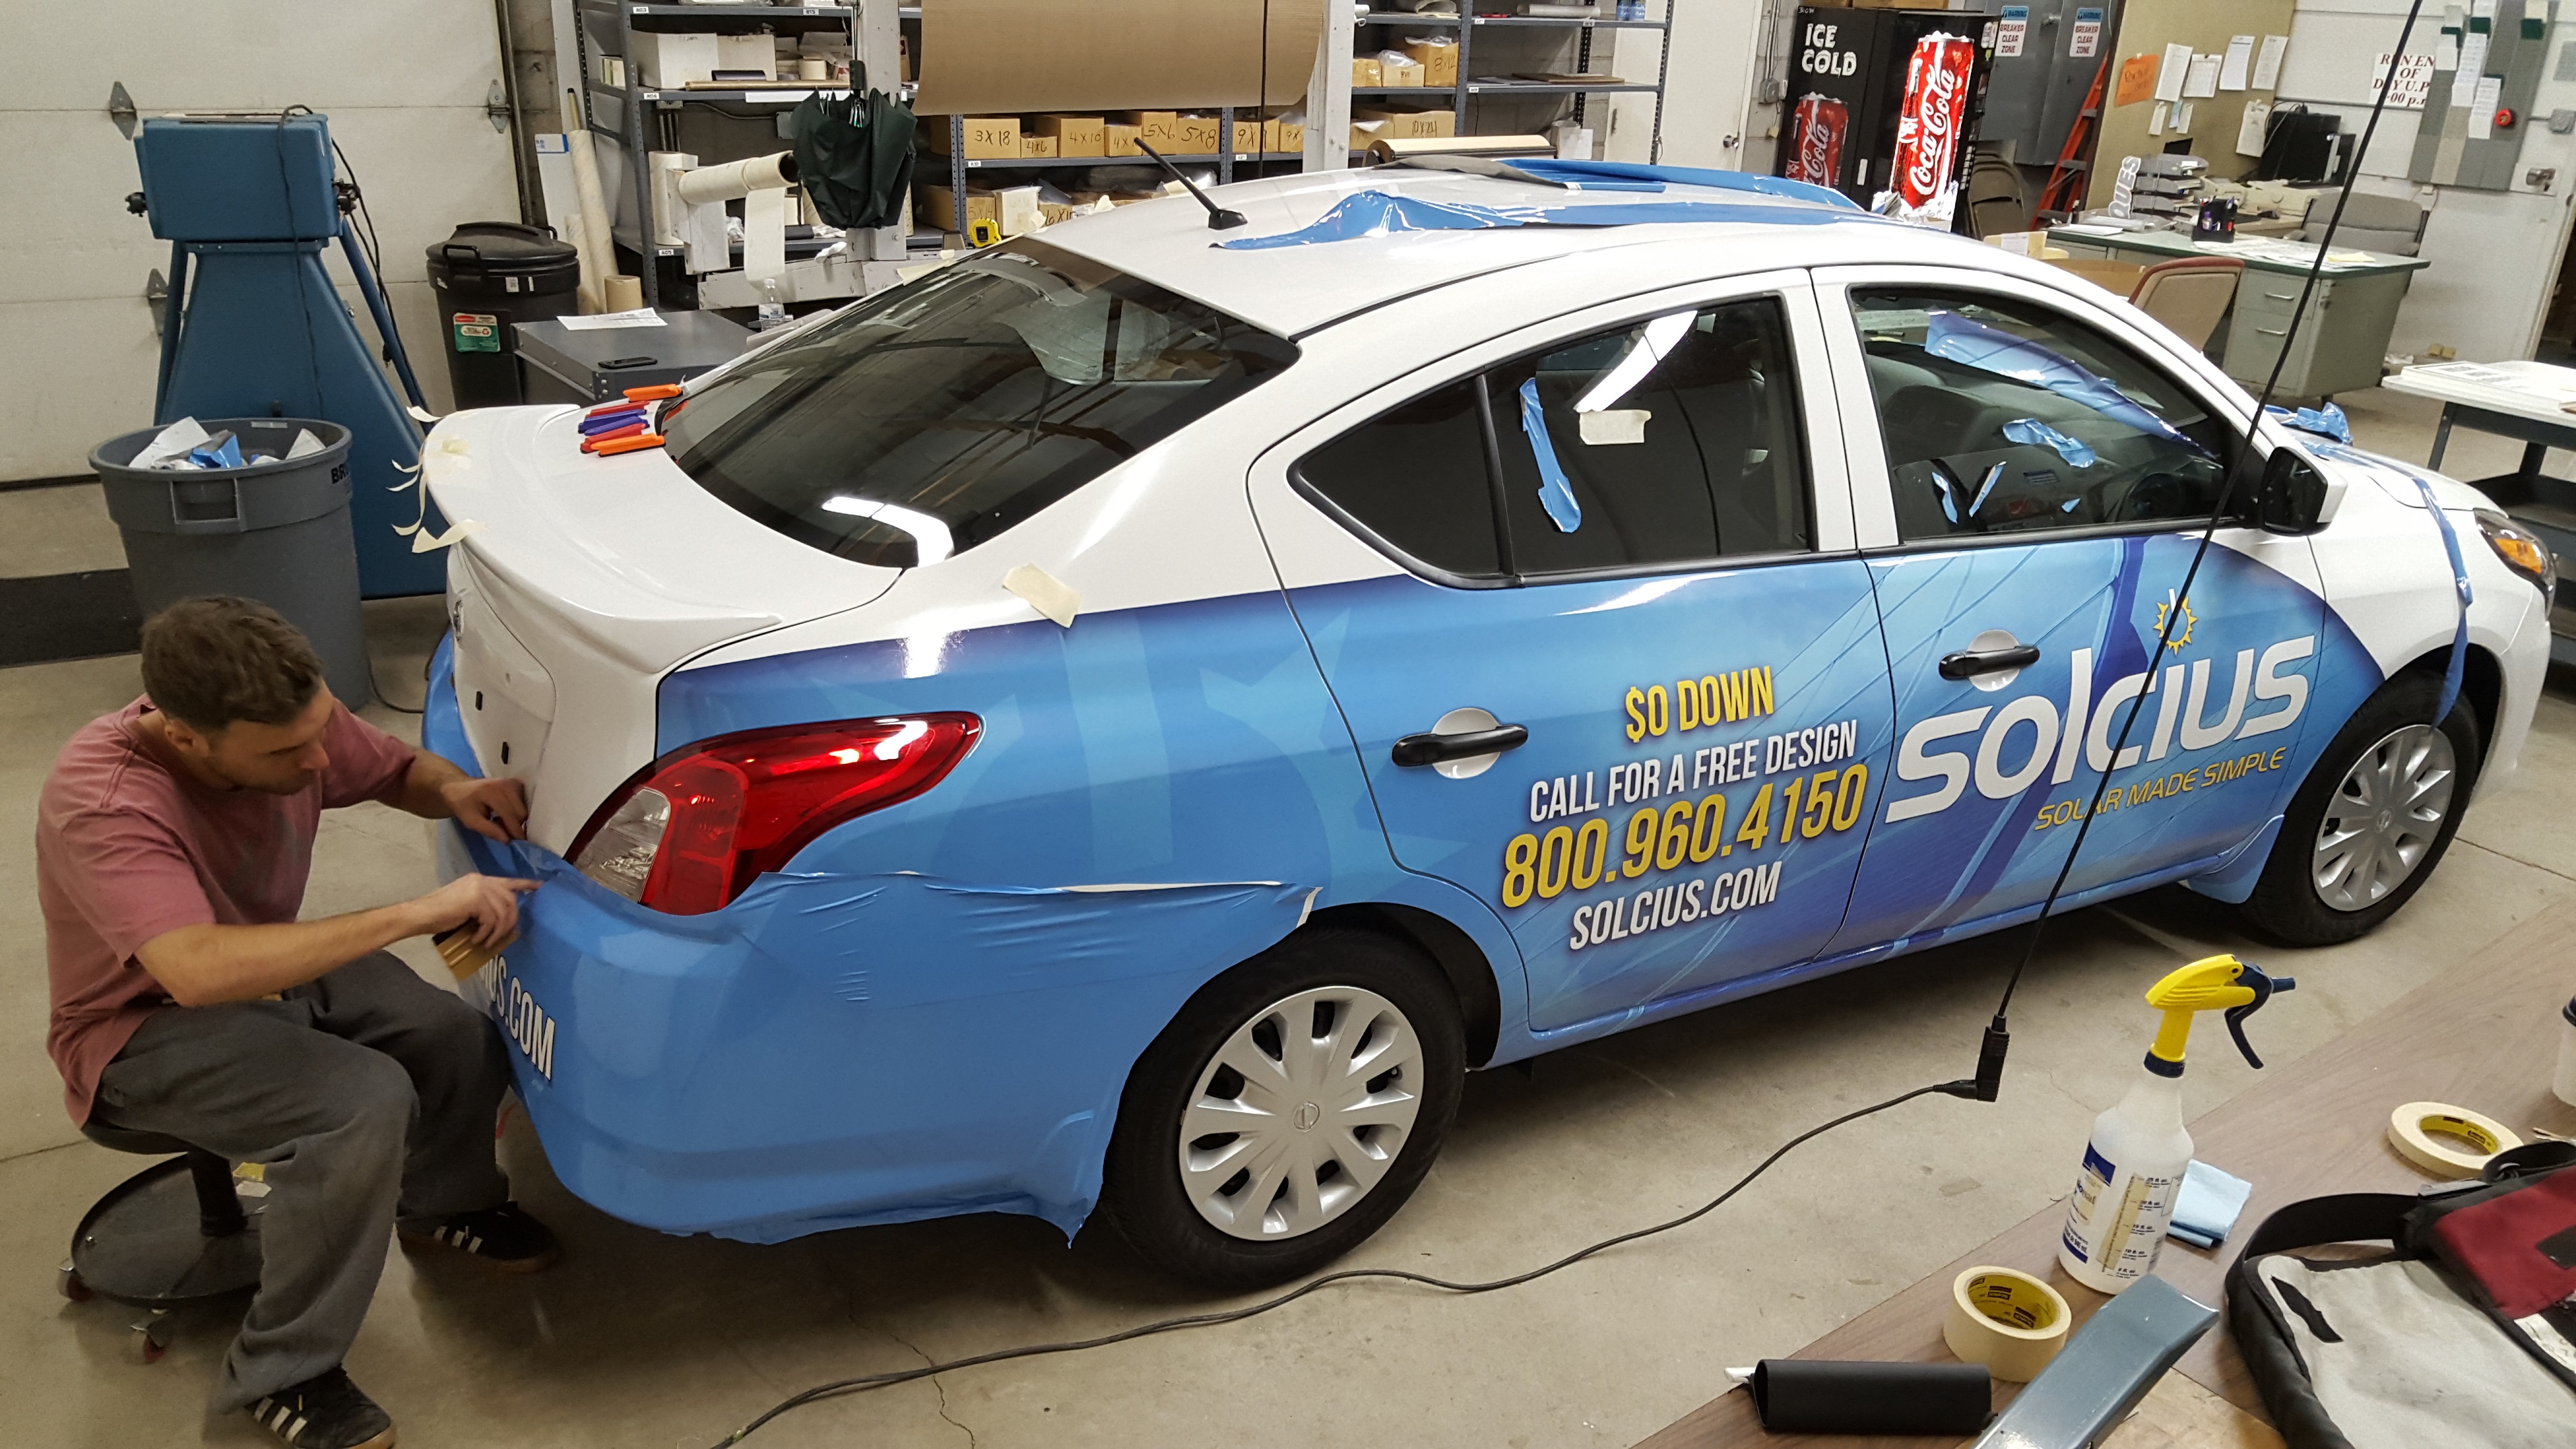 Vehicle Wrap Being Installed